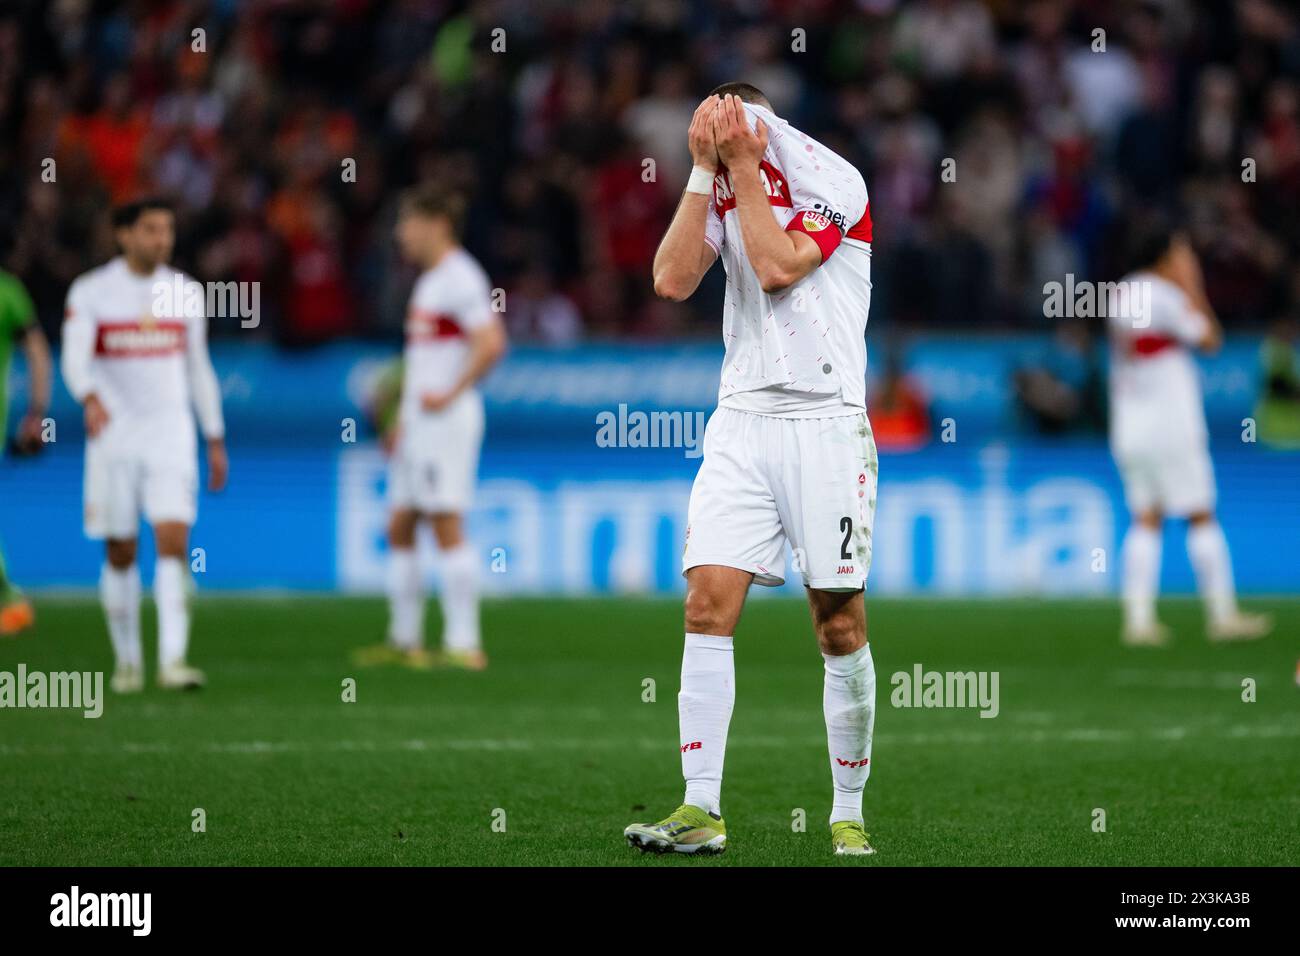 Leverkusen, Germany. 27th Apr, 2024. Soccer: Bundesliga, Bayer Leverkusen - VfB Stuttgart, Matchday 31, BayArena. Stuttgart's Waldemar Anton reacts after the game. Credit: Marius Becker/dpa - IMPORTANT NOTE: In accordance with the regulations of the DFL German Football League and the DFB German Football Association, it is prohibited to utilize or have utilized photographs taken in the stadium and/or of the match in the form of sequential images and/or video-like photo series./dpa/Alamy Live News Stock Photo